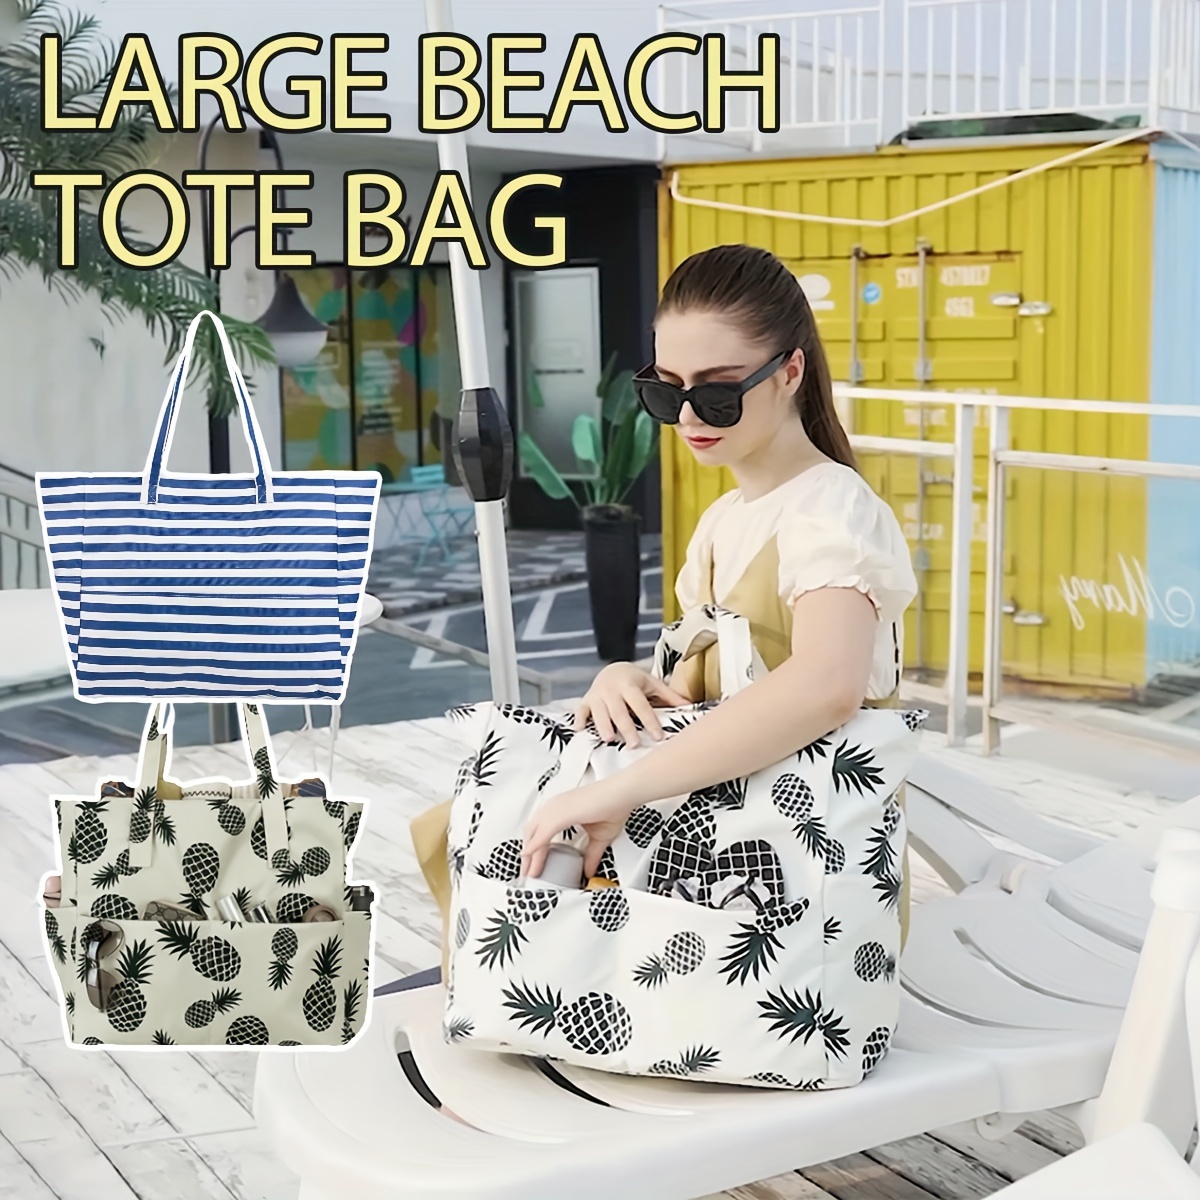 Beach Bag Women Large Travel Tote Bag with Cooler Set Waterproof Sandproof  Weekend Bag for Family, Pool, Picnic